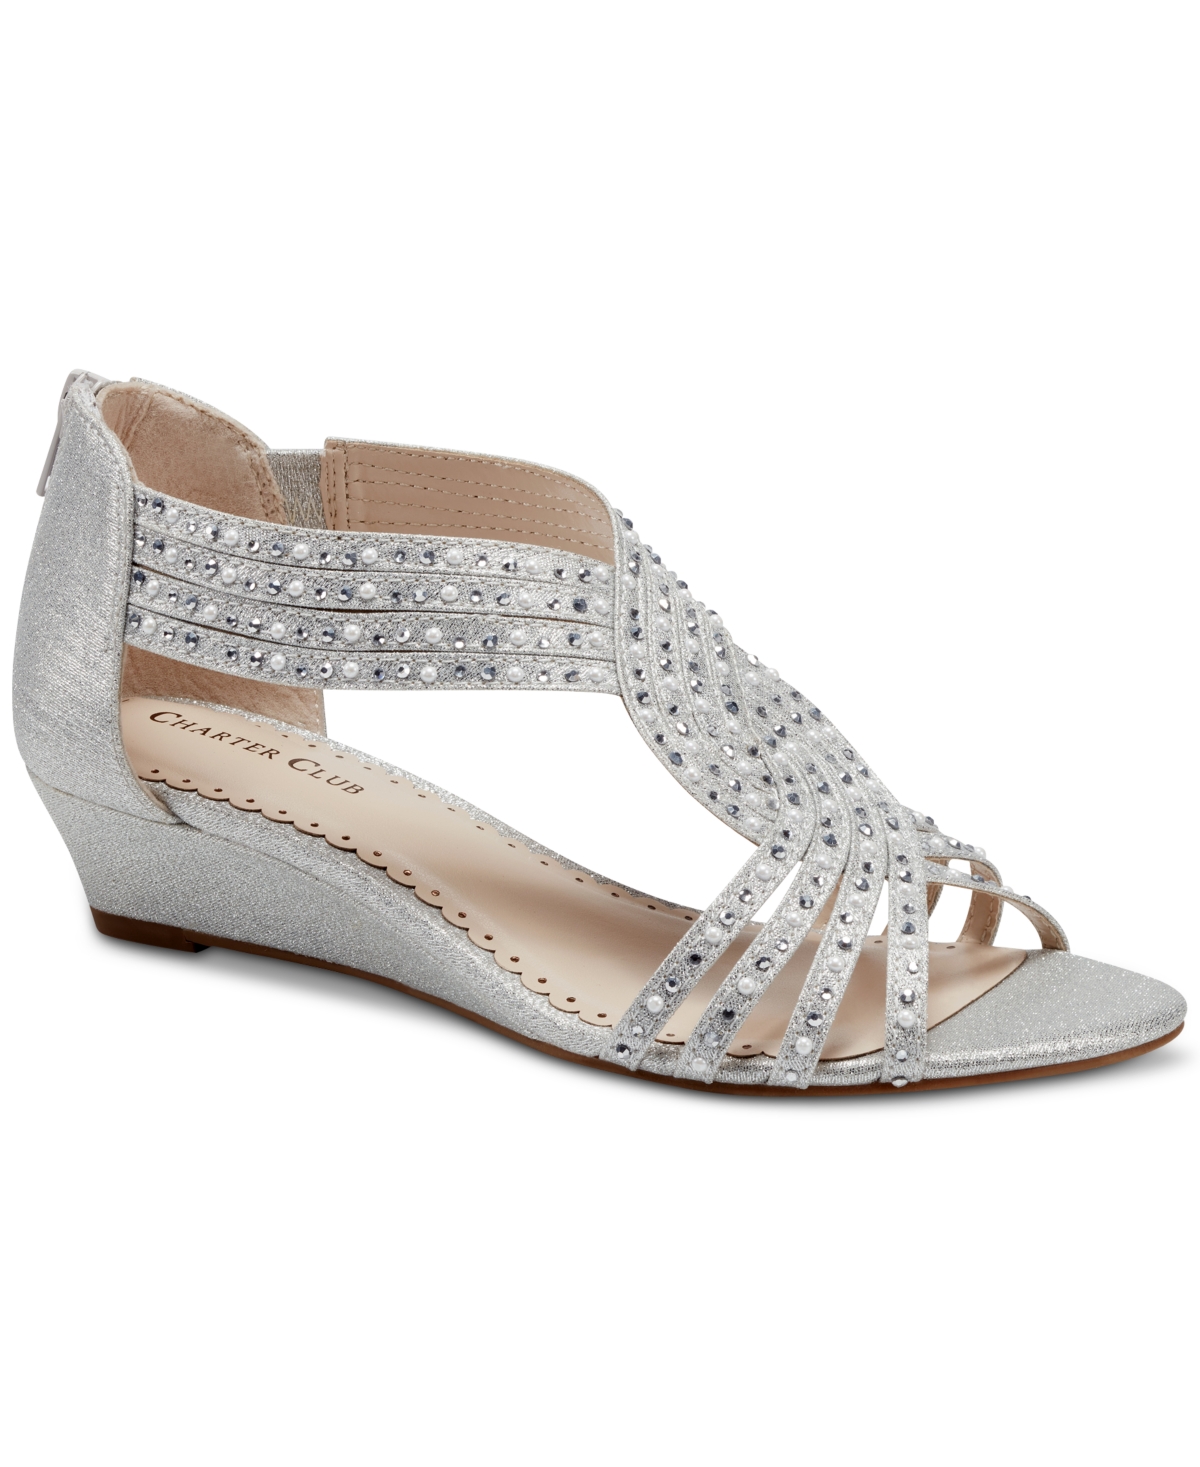 Charter Club Ginifur Wedge Sandals, Created for Macy's Women's Shoes